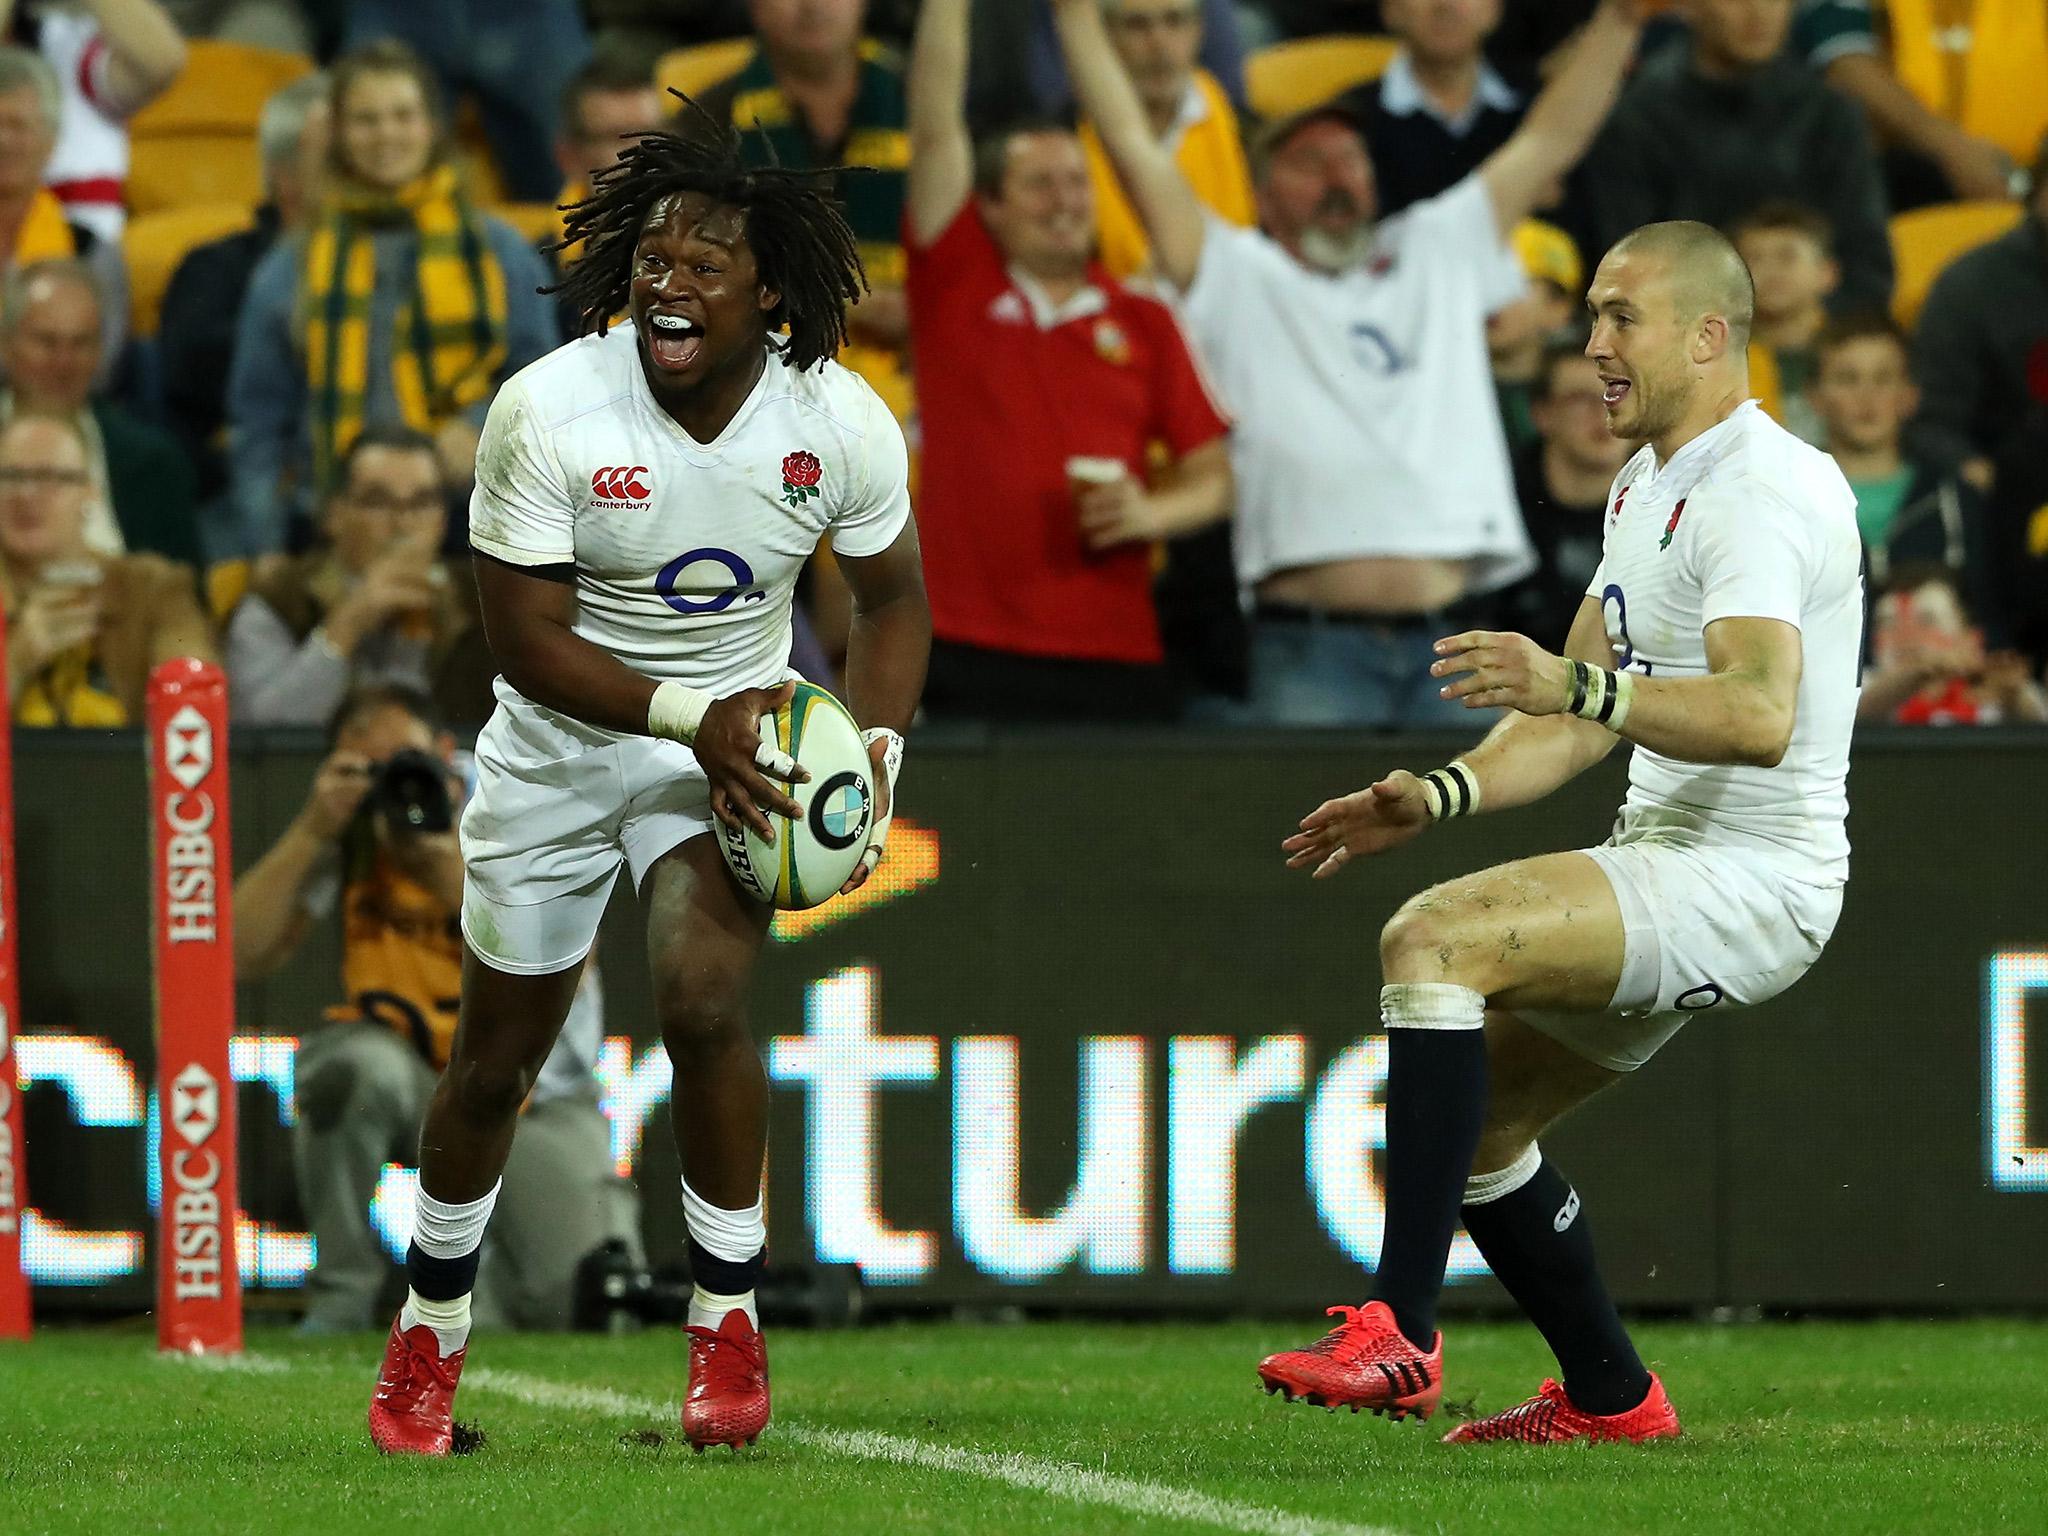 Marland Yarde celebrates after scoring for England (Getty)